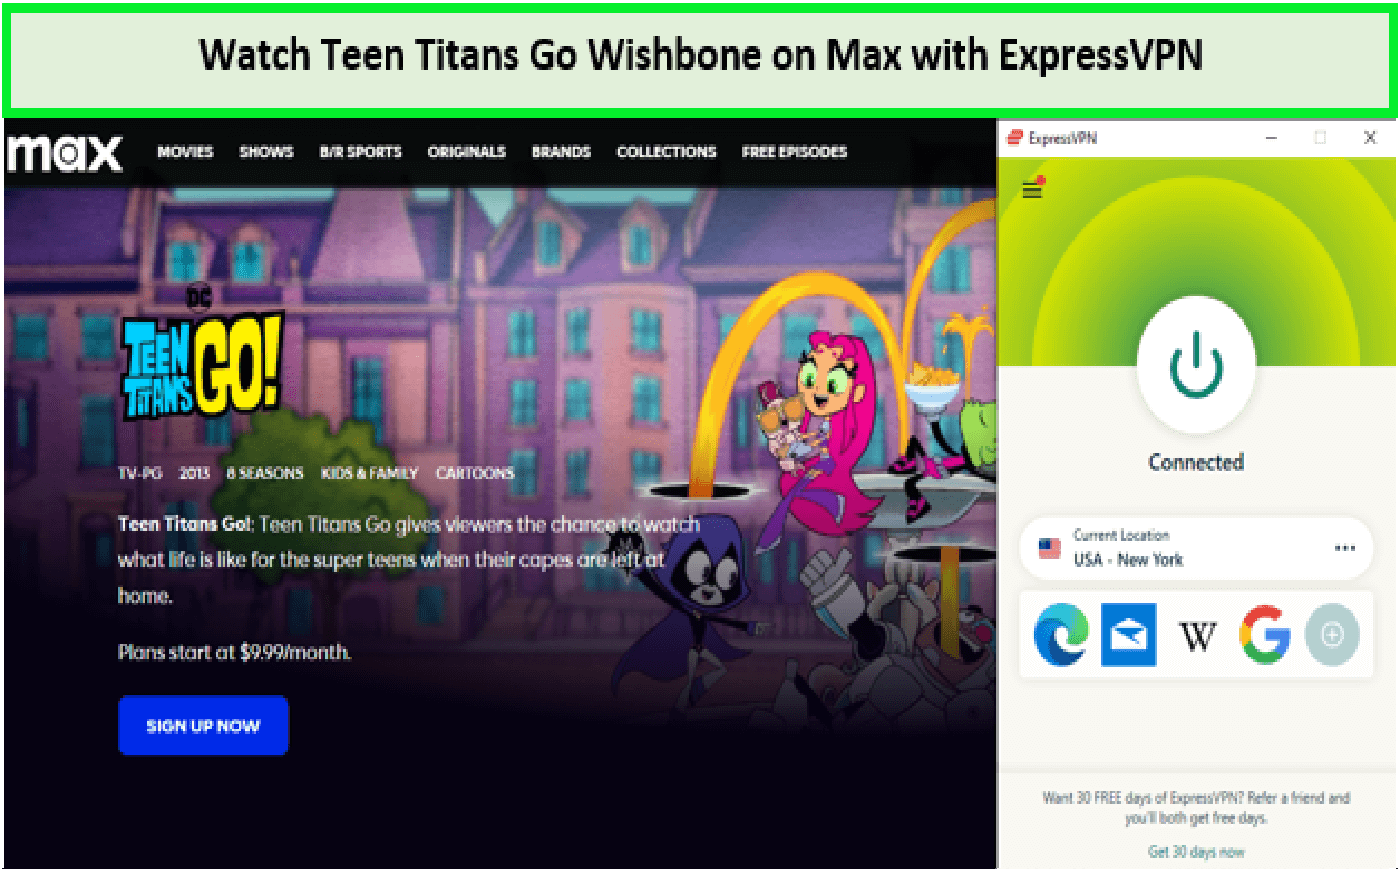 Watch-Teen-Titans-Go-Wishbone-in-India-on-Max-with-ExpressVPN